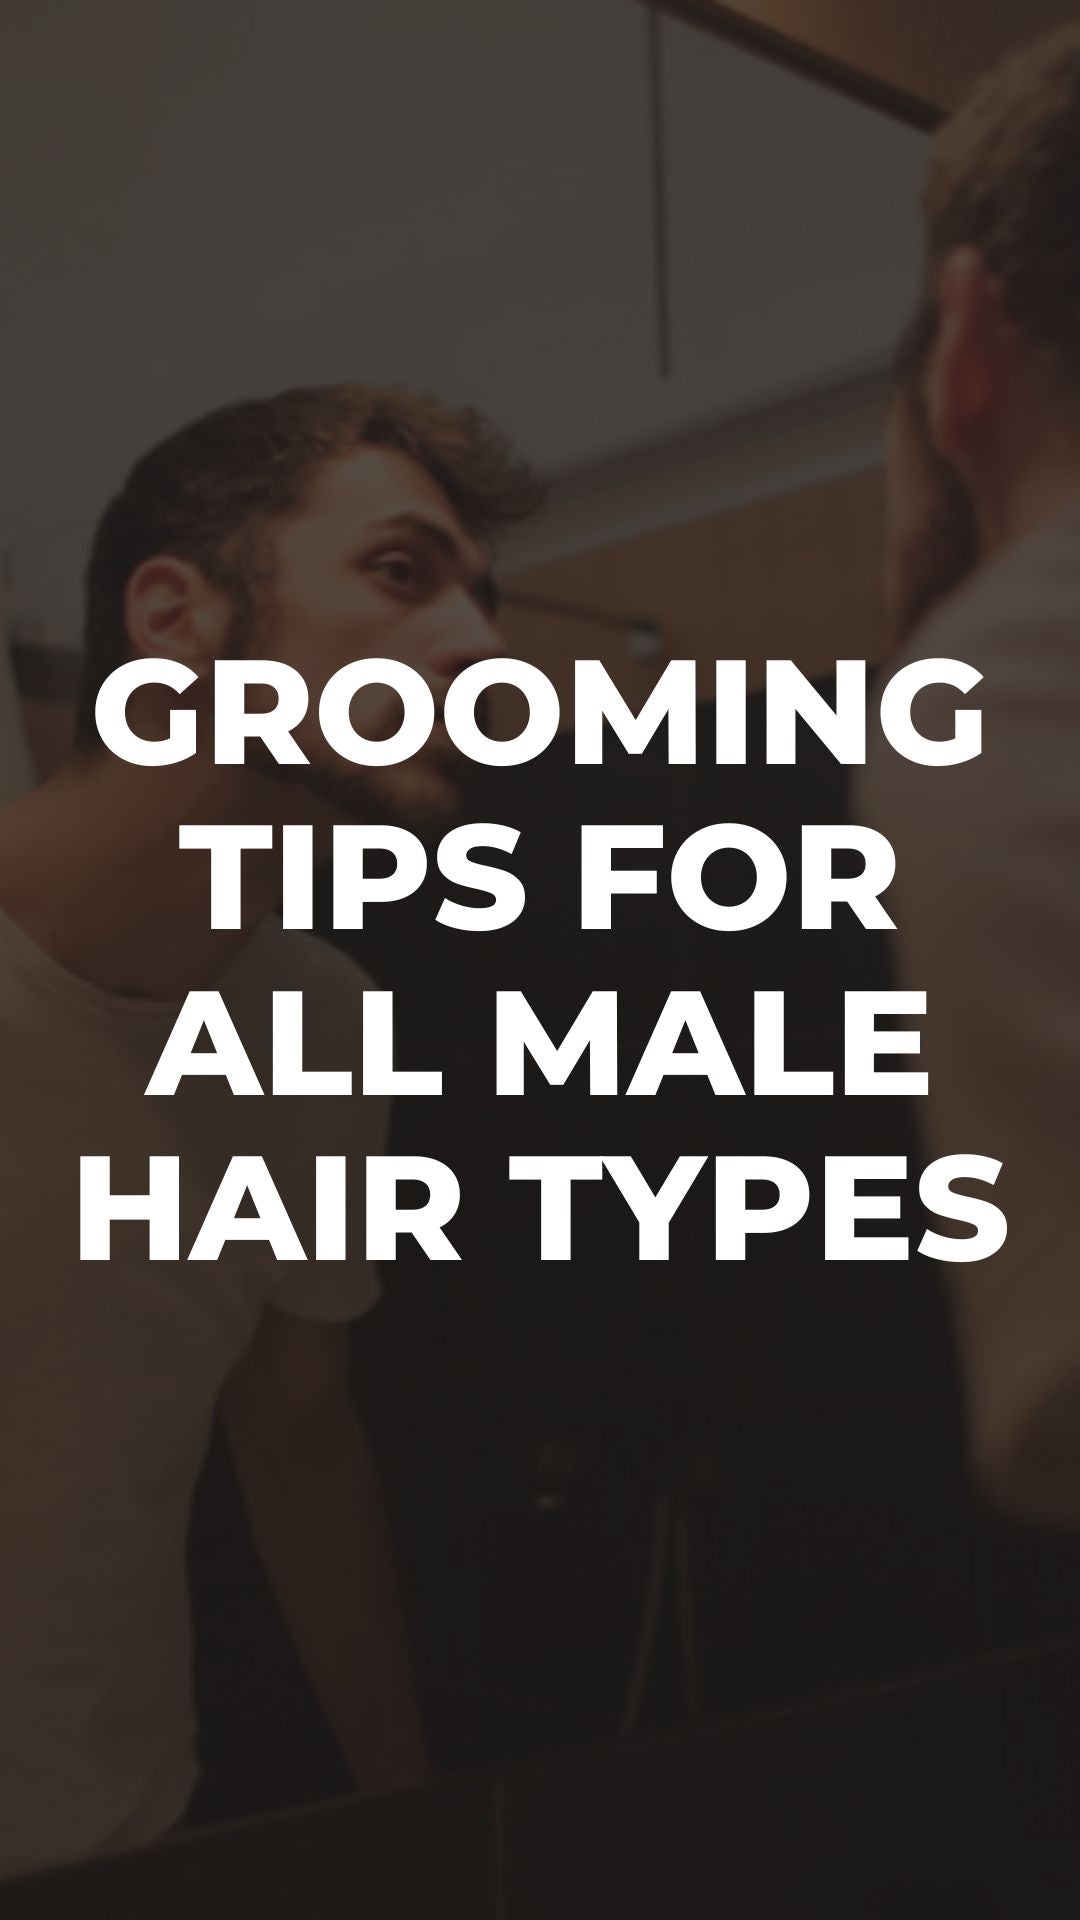 Grooming Tips For All Male Hair Types